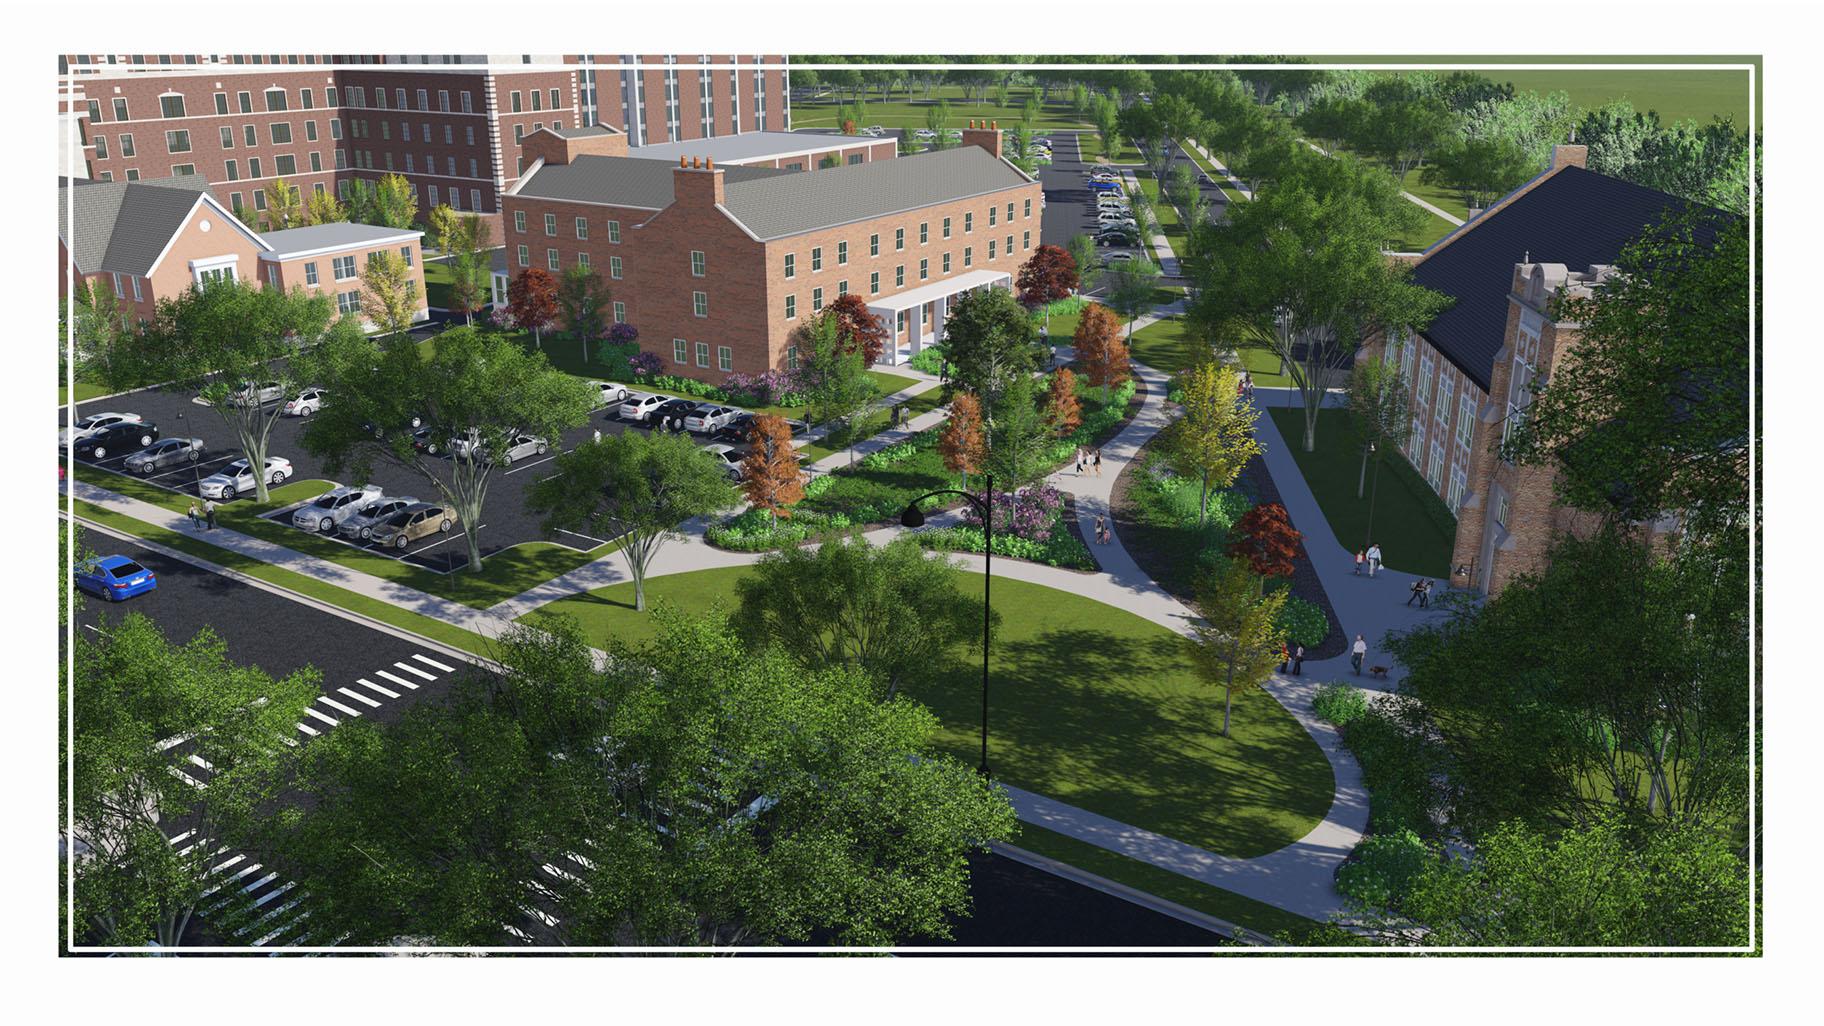 The former site of Copley Hospital in Aurora will include senior living residences, a medical facility and a school administrative building, as depicted in this rendering. (Credit Fox Valley Developers)